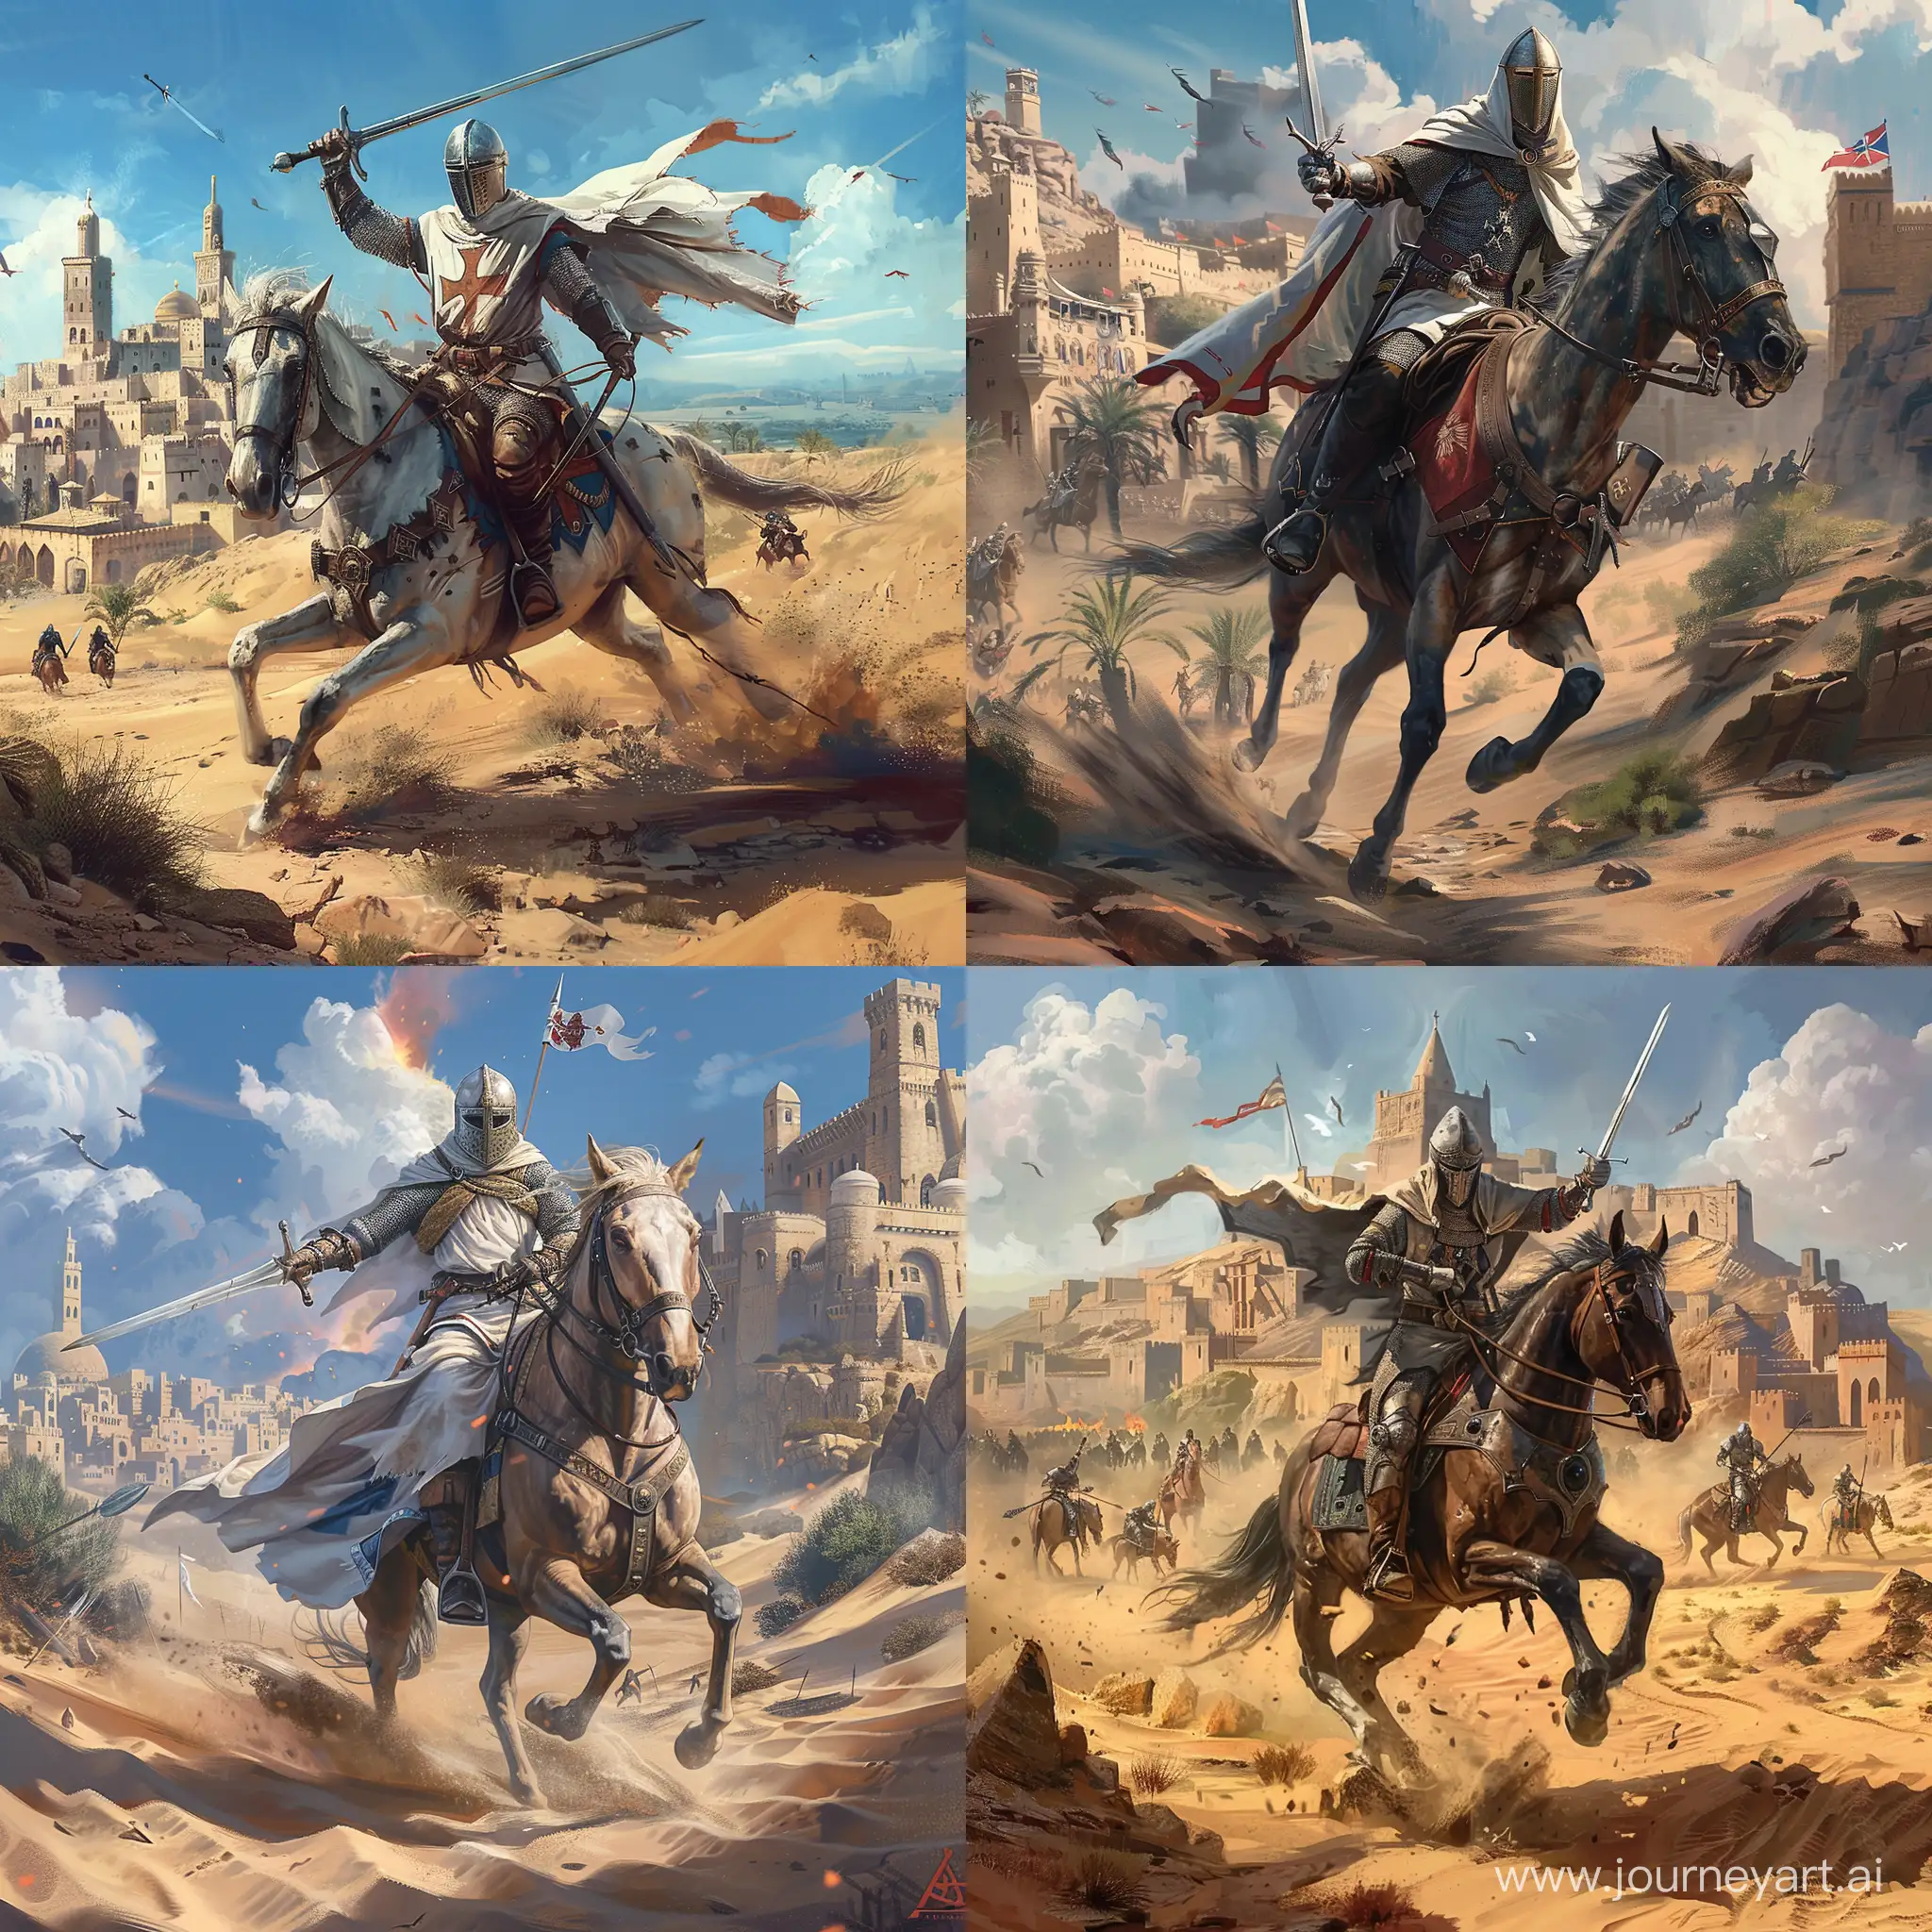 Crusader knight on horseback galloping through the desert with sword in right hand, battle setting, beautiful town in the background